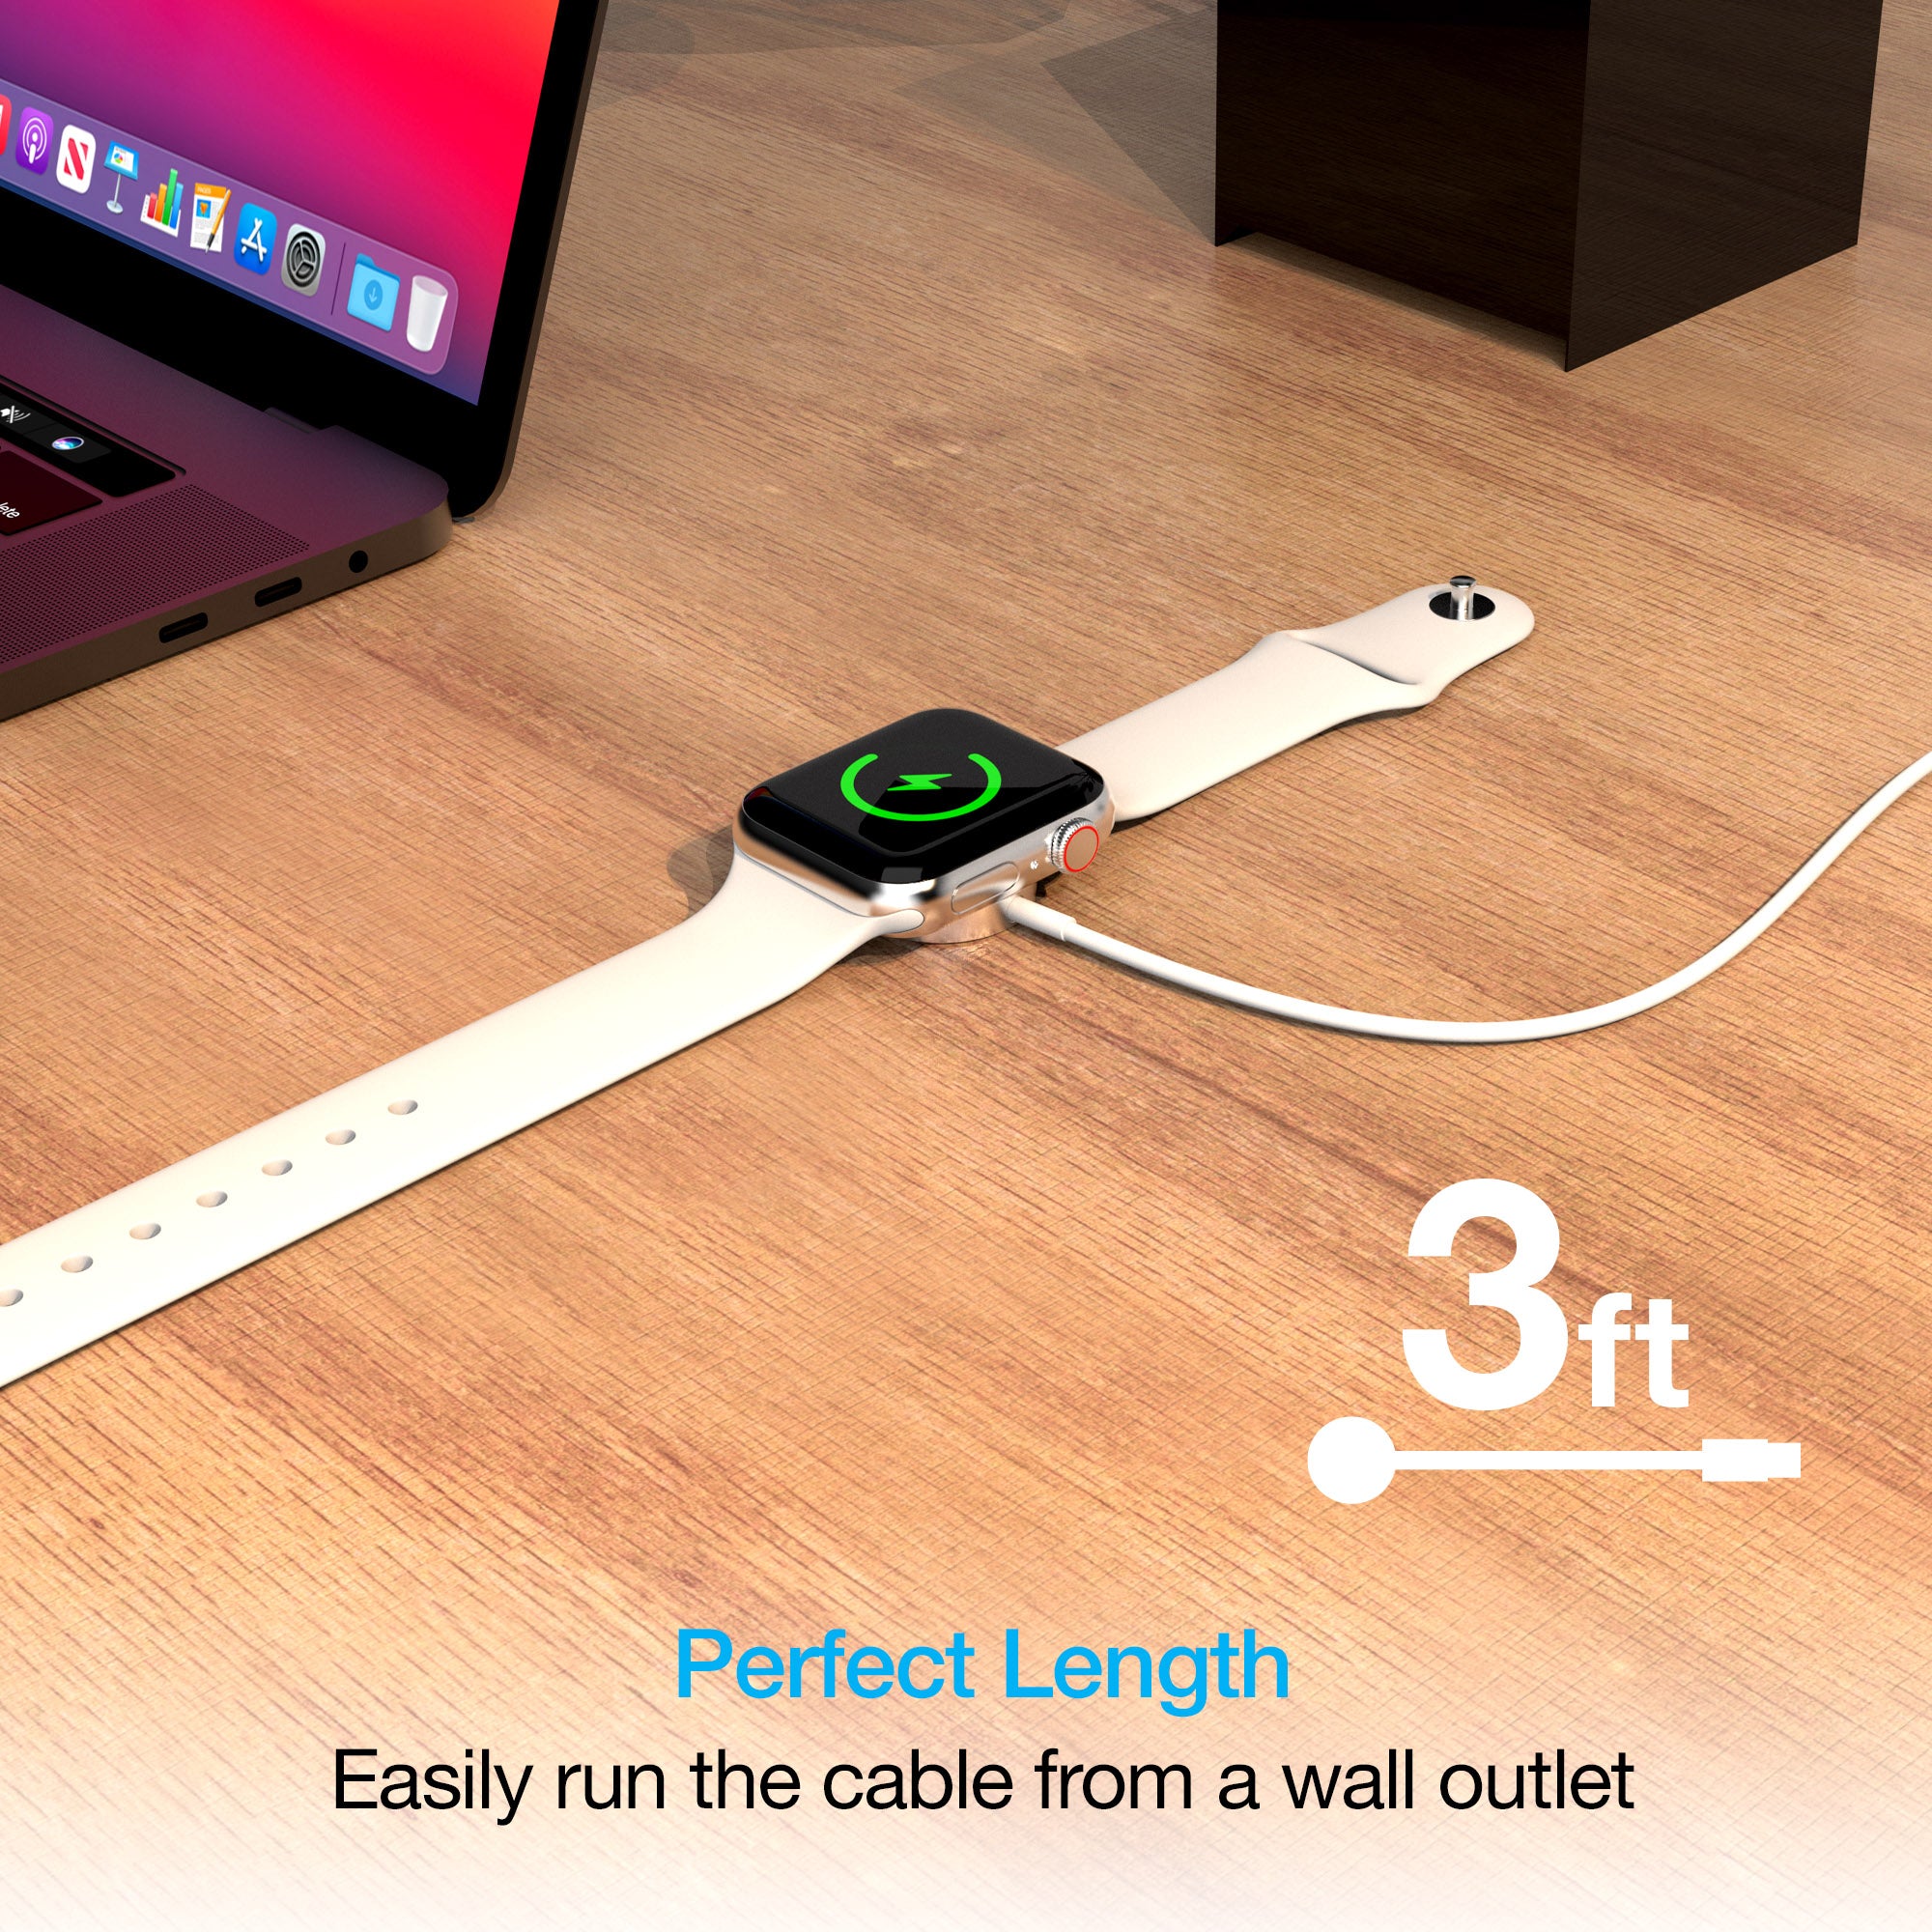 Magnetic Charging Cable